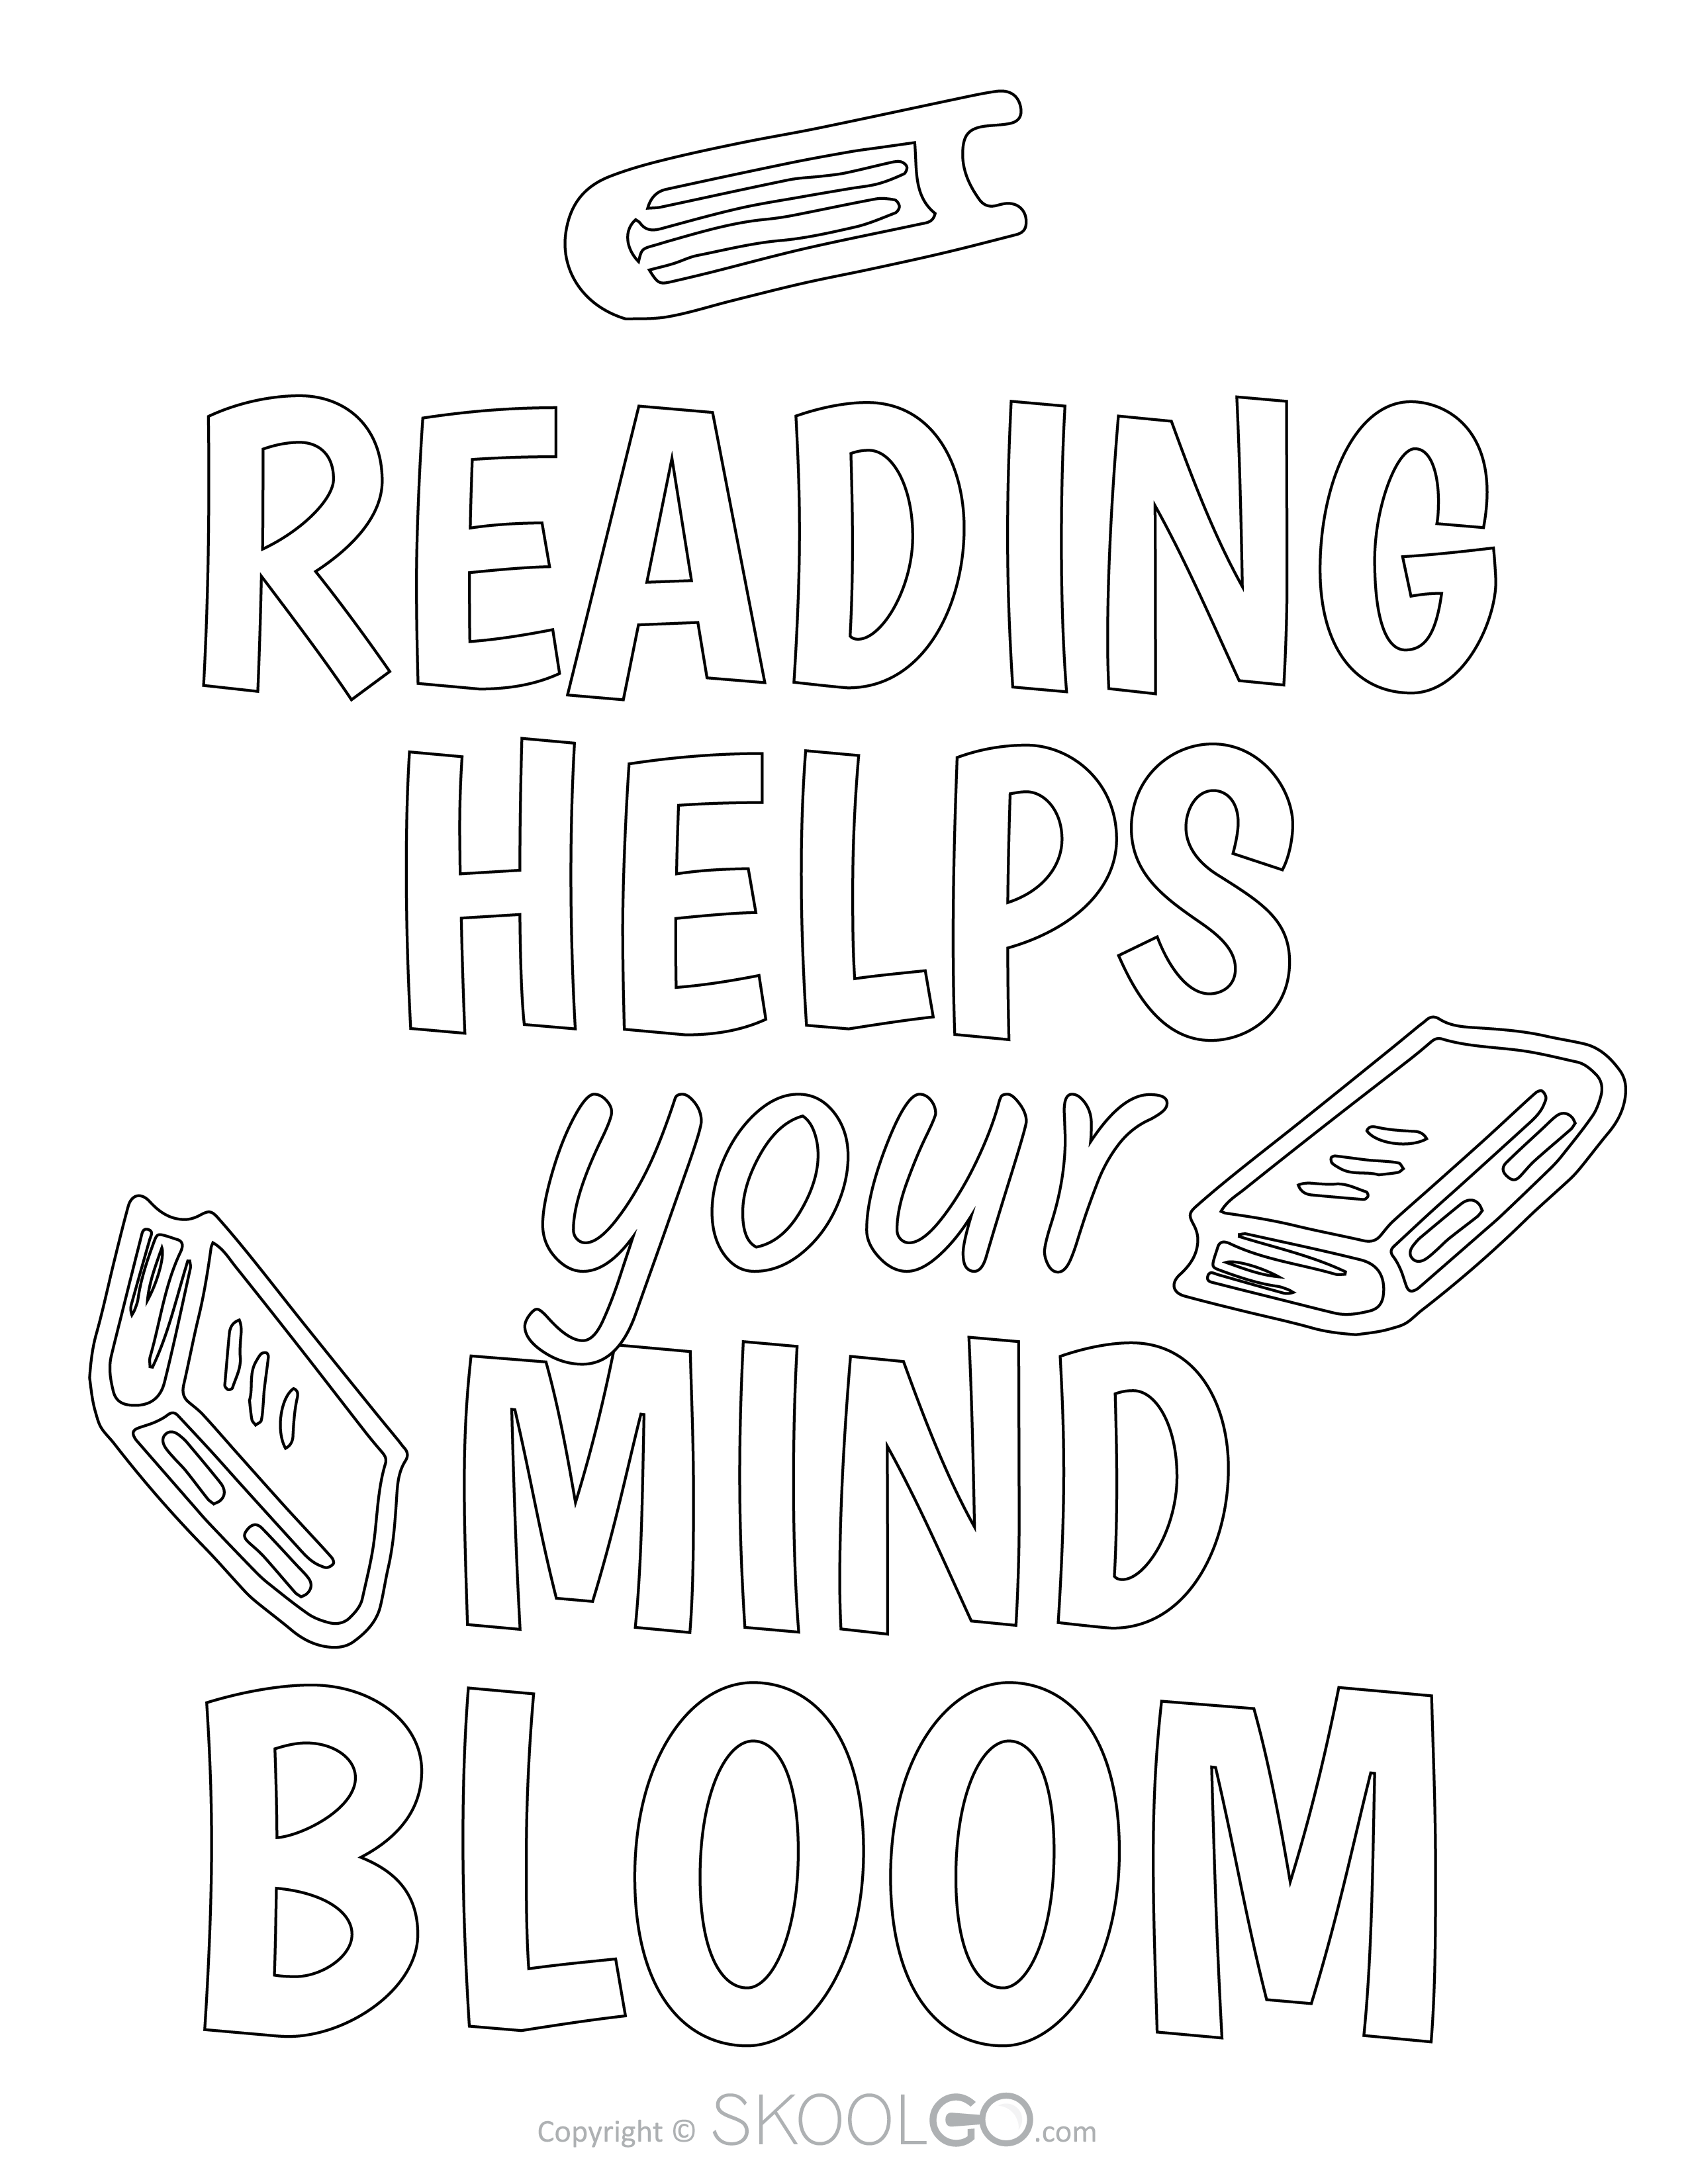 Reading Helps Your Mind Bloom - Free Coloring Version Poster